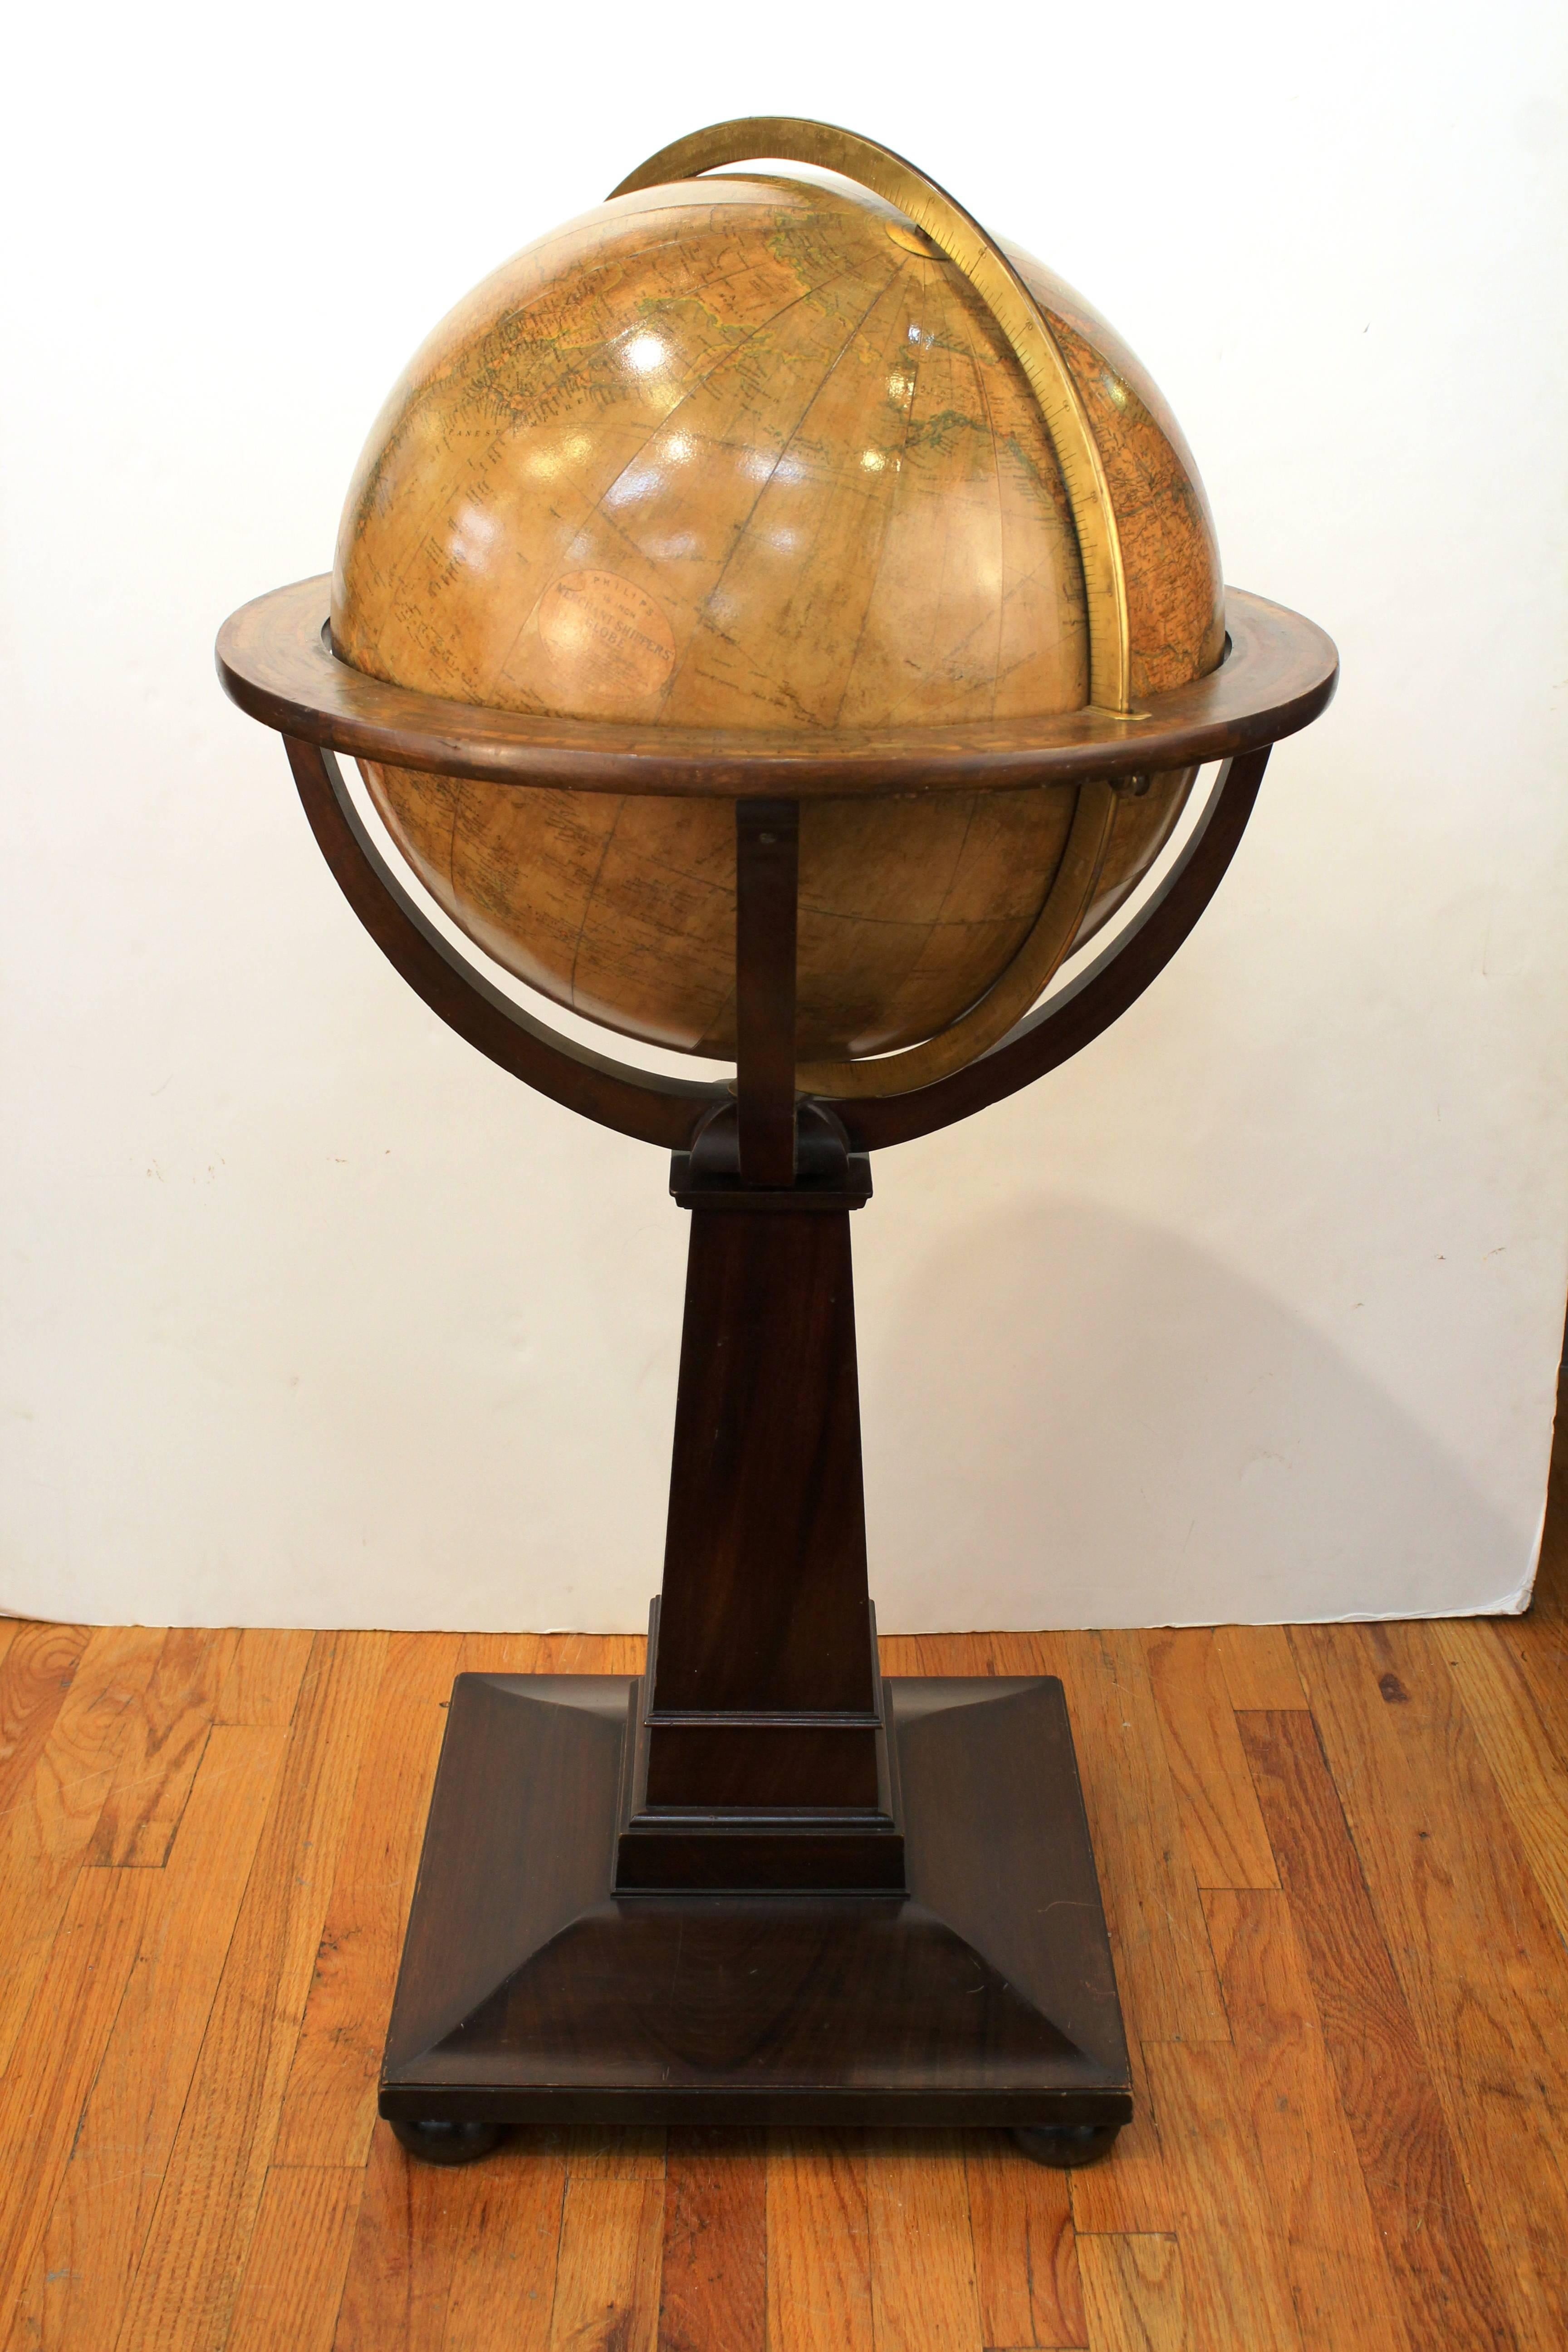 A Philip's 18inch Merchant Shippers Globe from Nov. 1899. Produced in London by George Philip and Son LTD. Includes a brass meridian ring and a horizontal ring with zodiac symbols and calendrical notes. The globe is completely rotational on a wooden